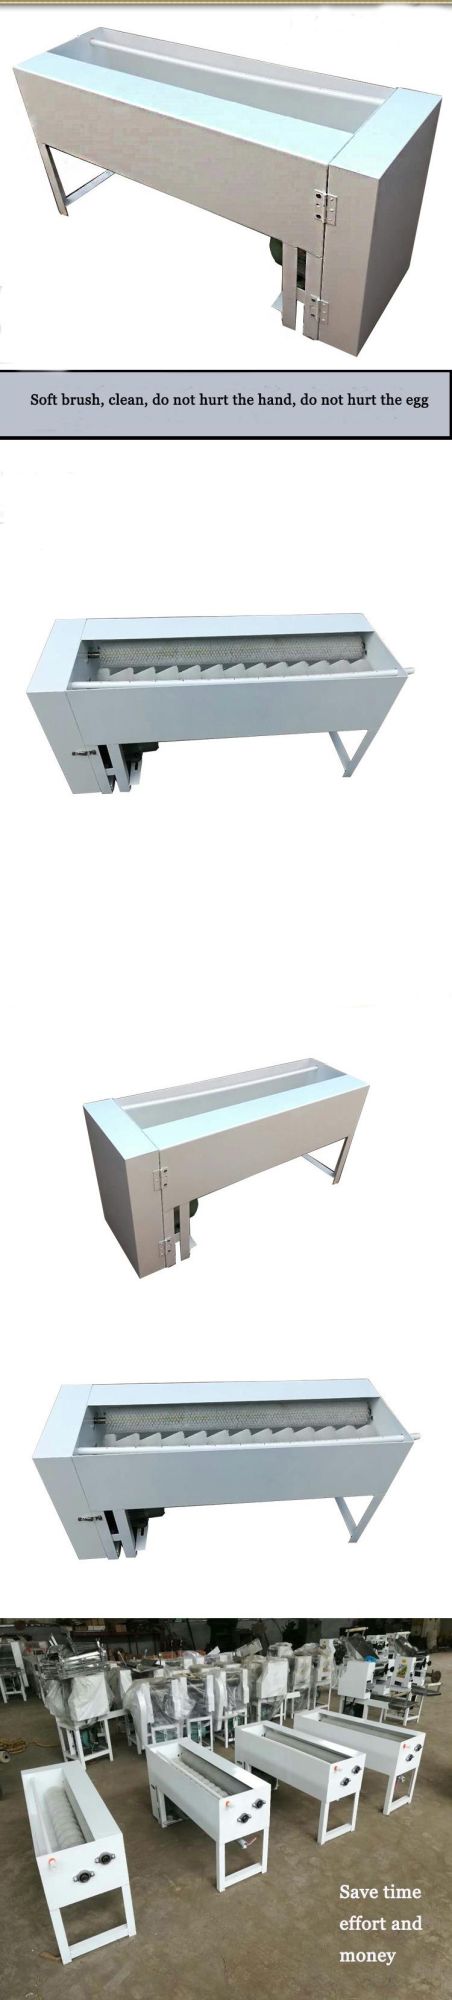 New Type Egg Cleaning Machine/Chicken Egg Washer for Sale/Small Duck Egg Washing Machine